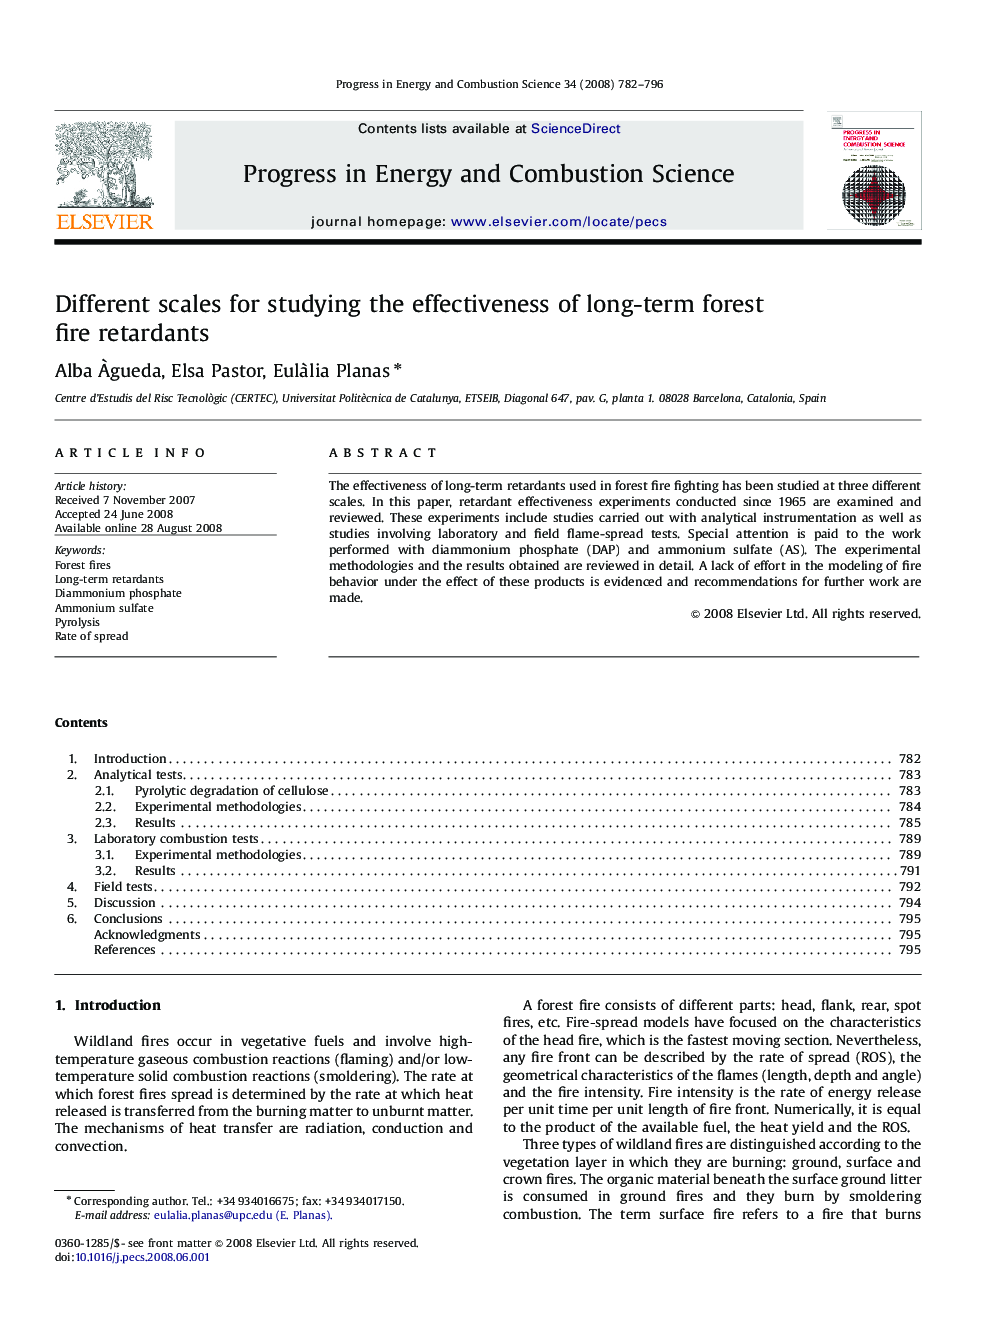 Different scales for studying the effectiveness of long-term forest fire retardants